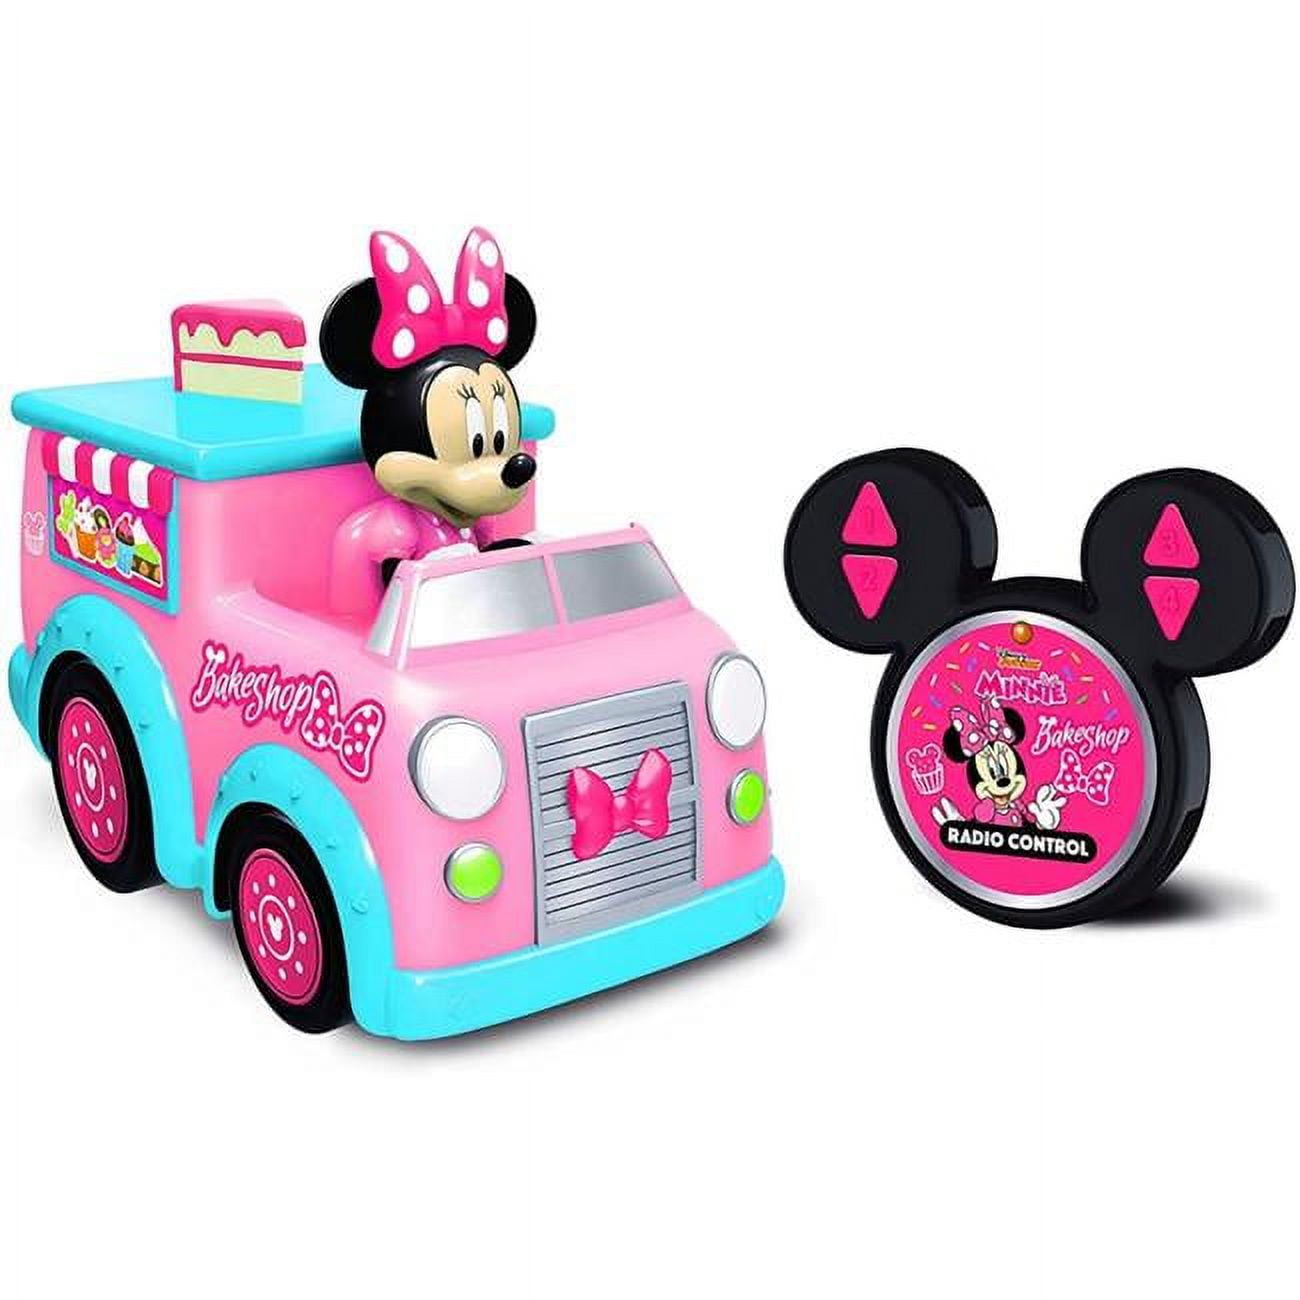 Disney Junior 9'' 2.4 GHz RC Toy Vehicle - Minnie's Bakeshop, 3 Years and  up 